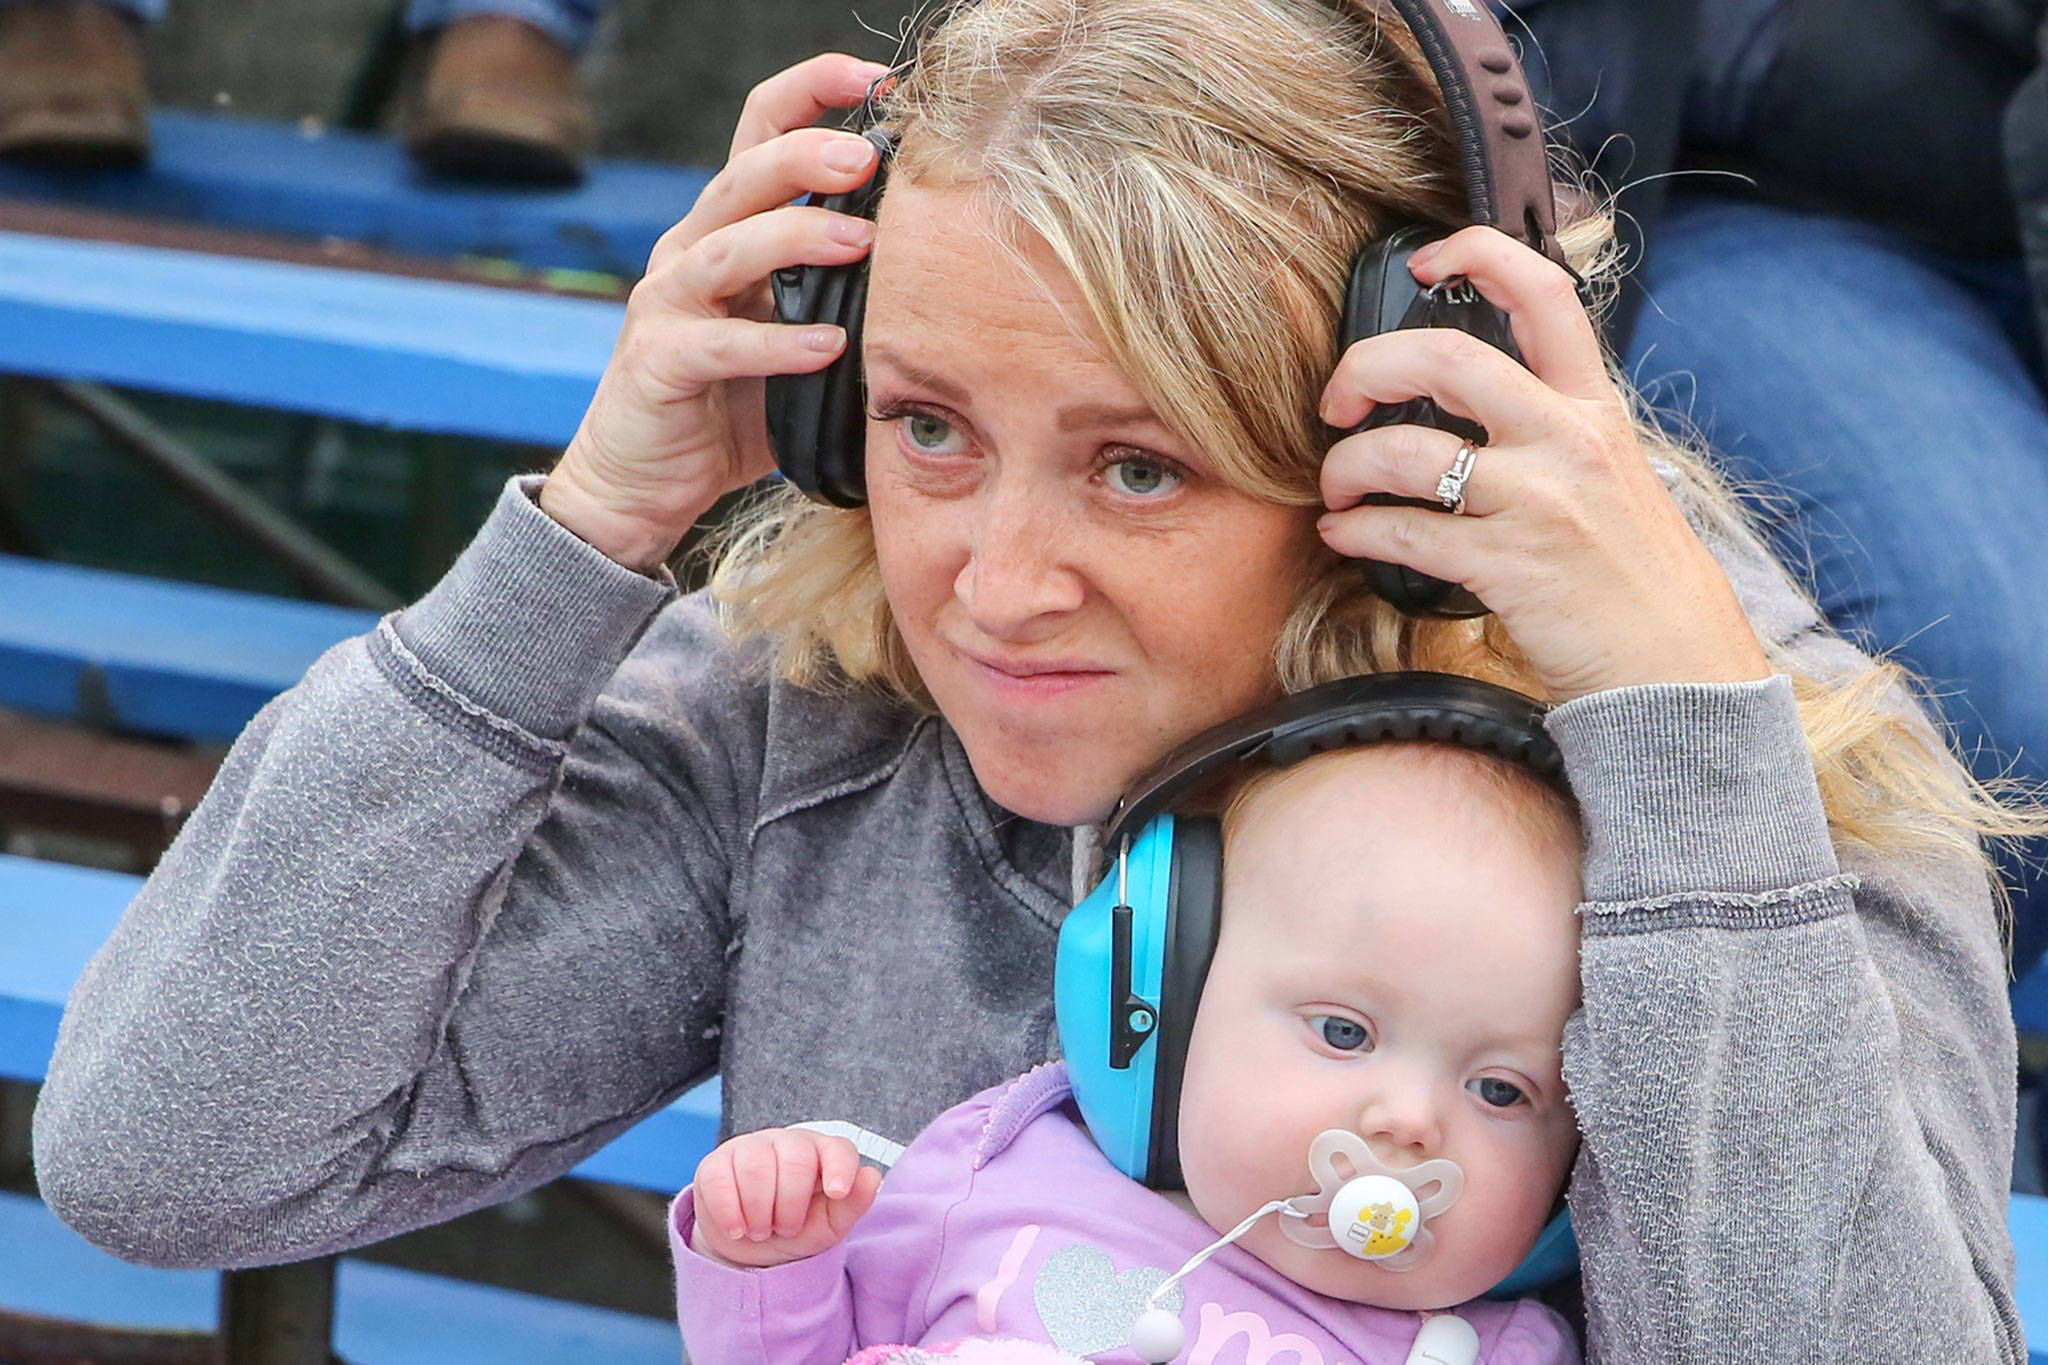 A fan dons ear protection for the high-octane entertainment of the monster truck show Friday evening during the Evergreen State Fair at the Evergreen Speedway in Monroe. (Kevin Clark / The Herald)